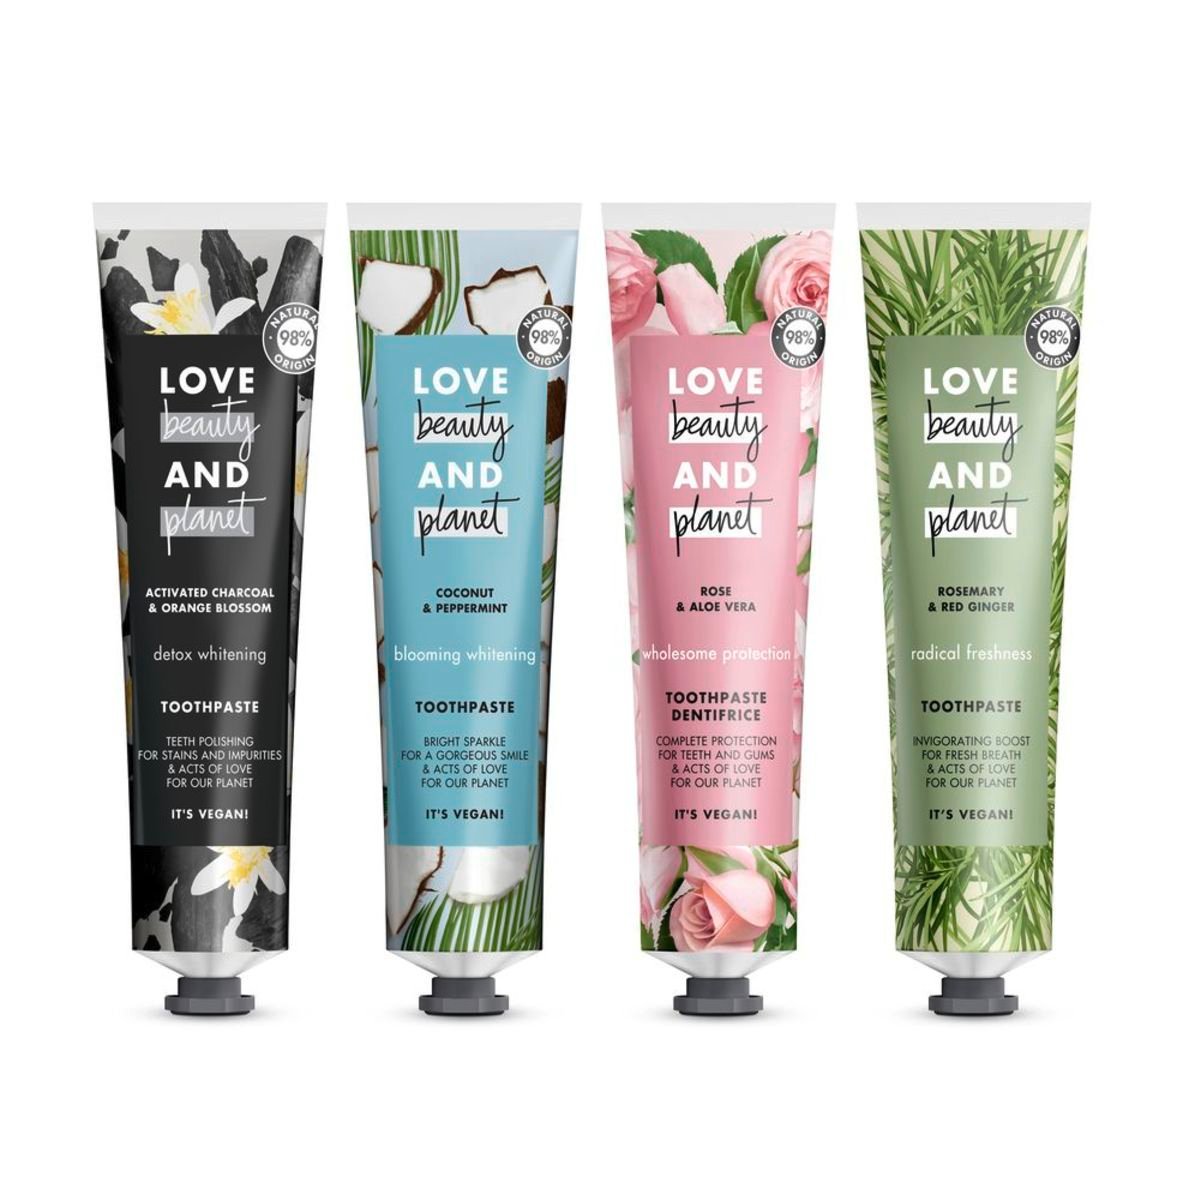 Love Beauty and Planet Wholesome Protection Rose and Aloe Vera Toothpaste 75 ml